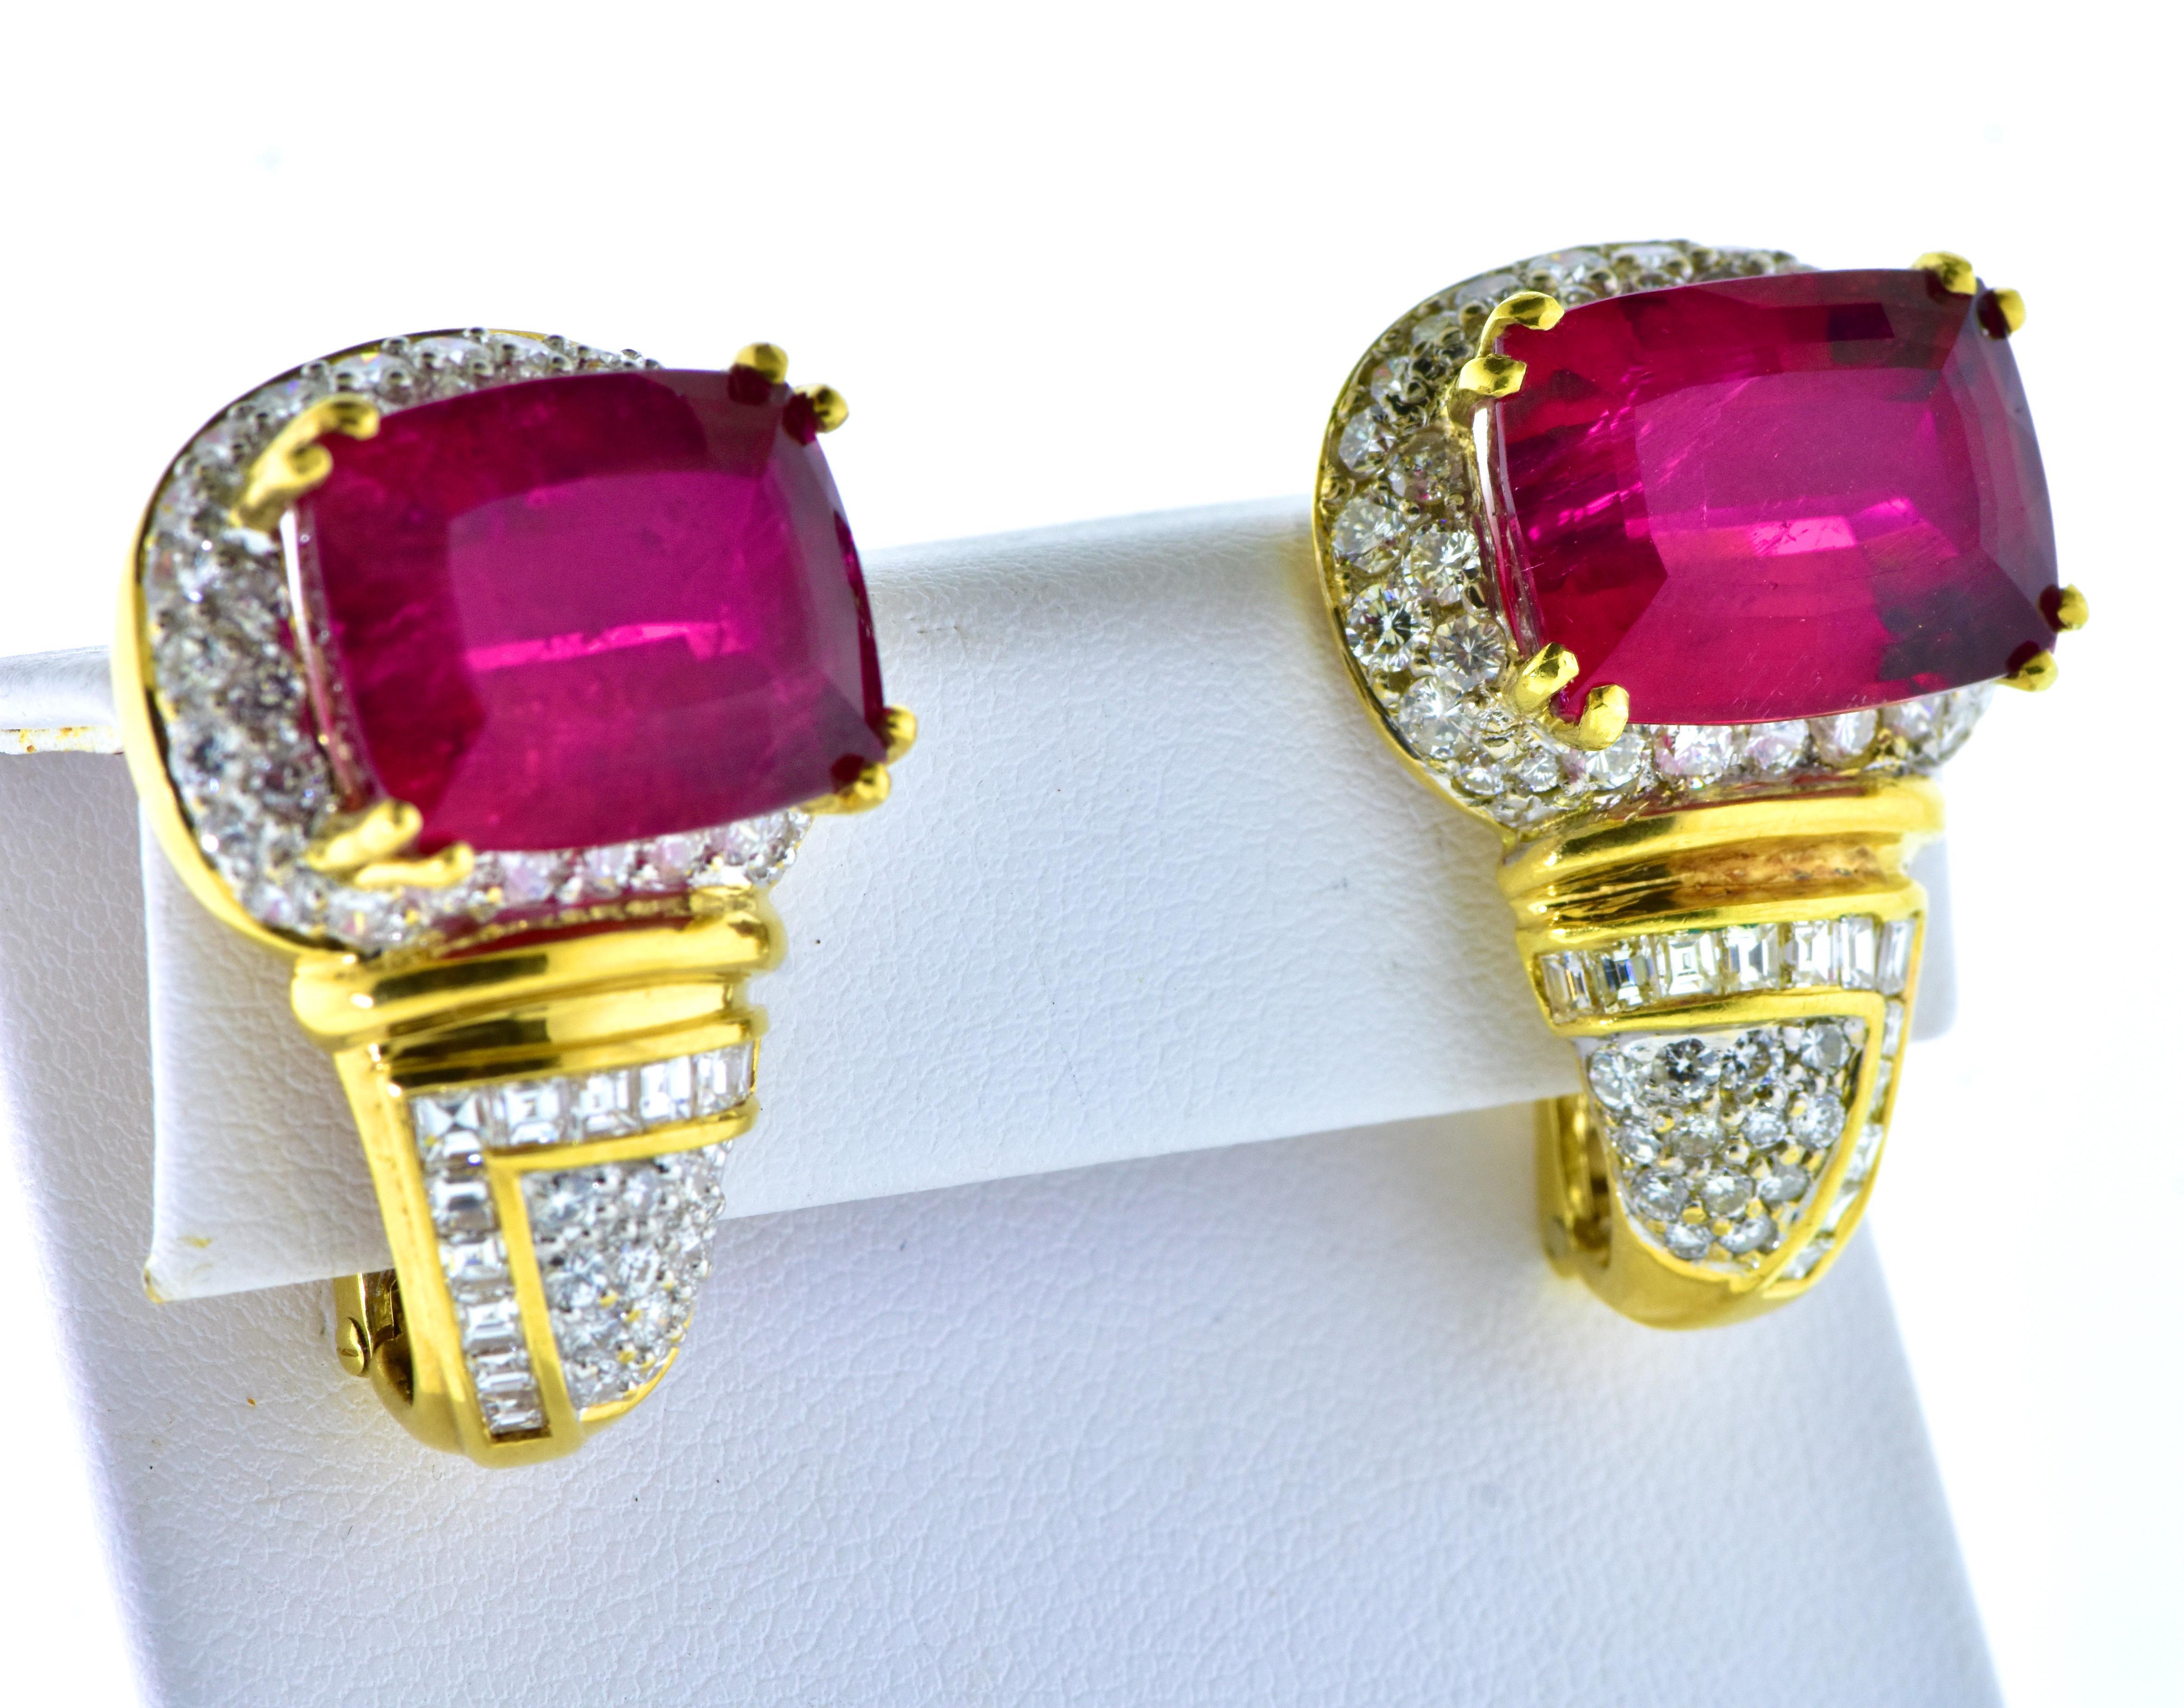 Cushion Cut Red Tourmaline weighing 26 Cts. with fine Diamonds, 5 cts., in 18k Fine Earrings For Sale